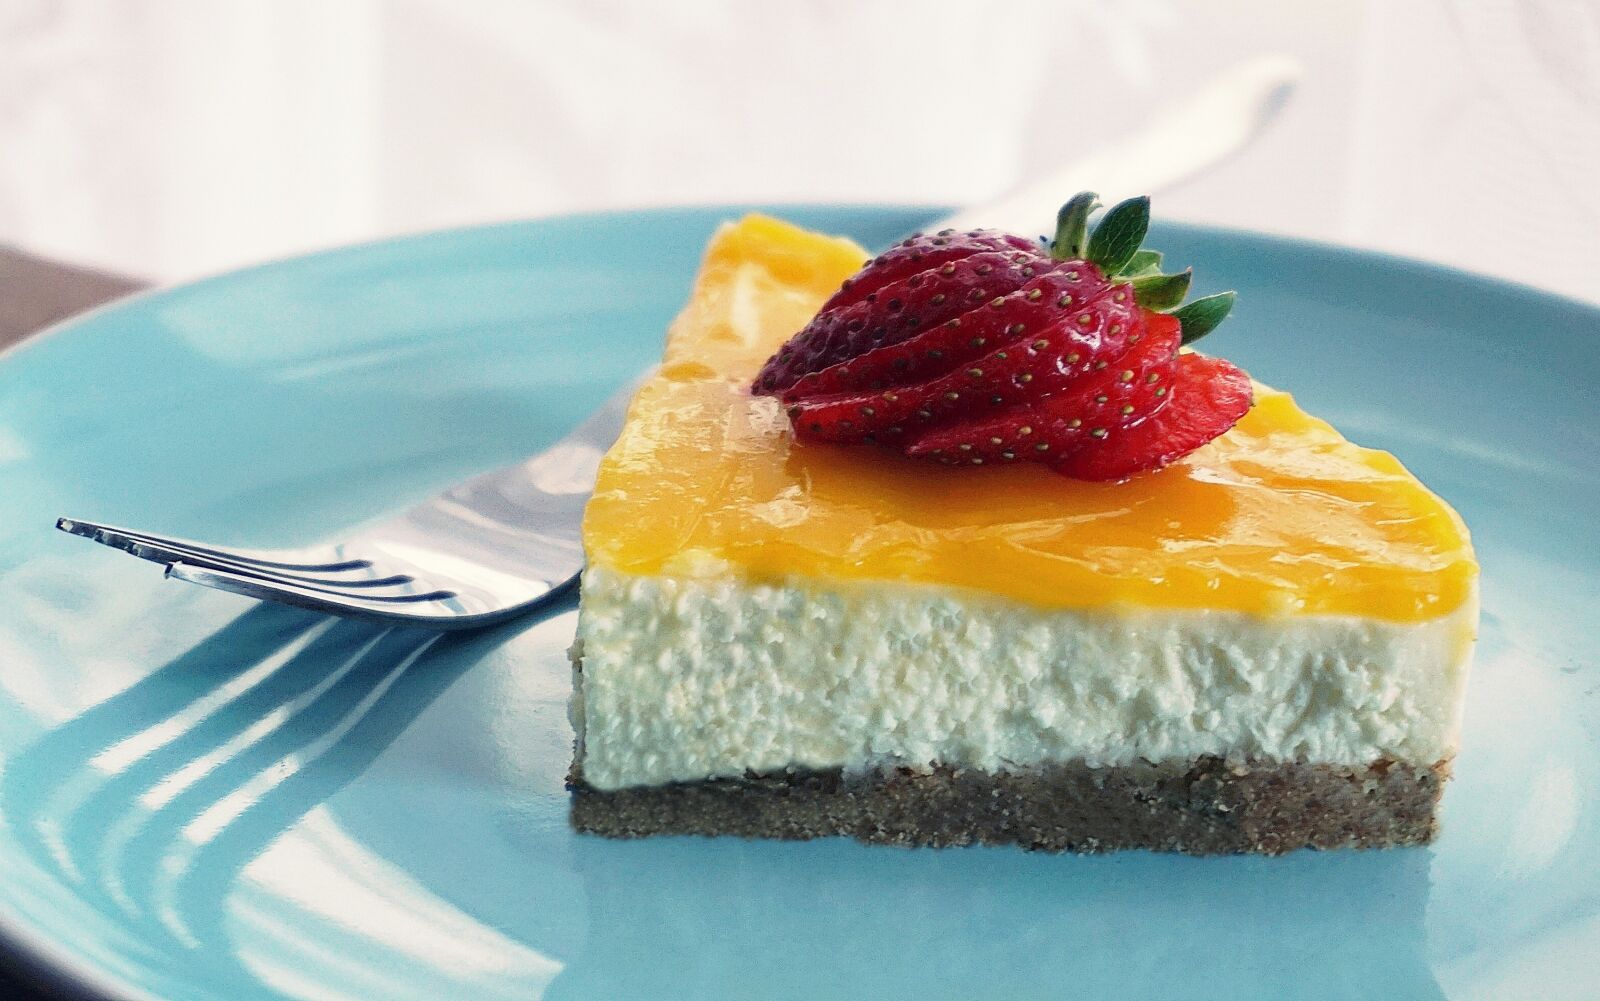 Sony a6000 sample photo. Cheesecake, dessert, food photography